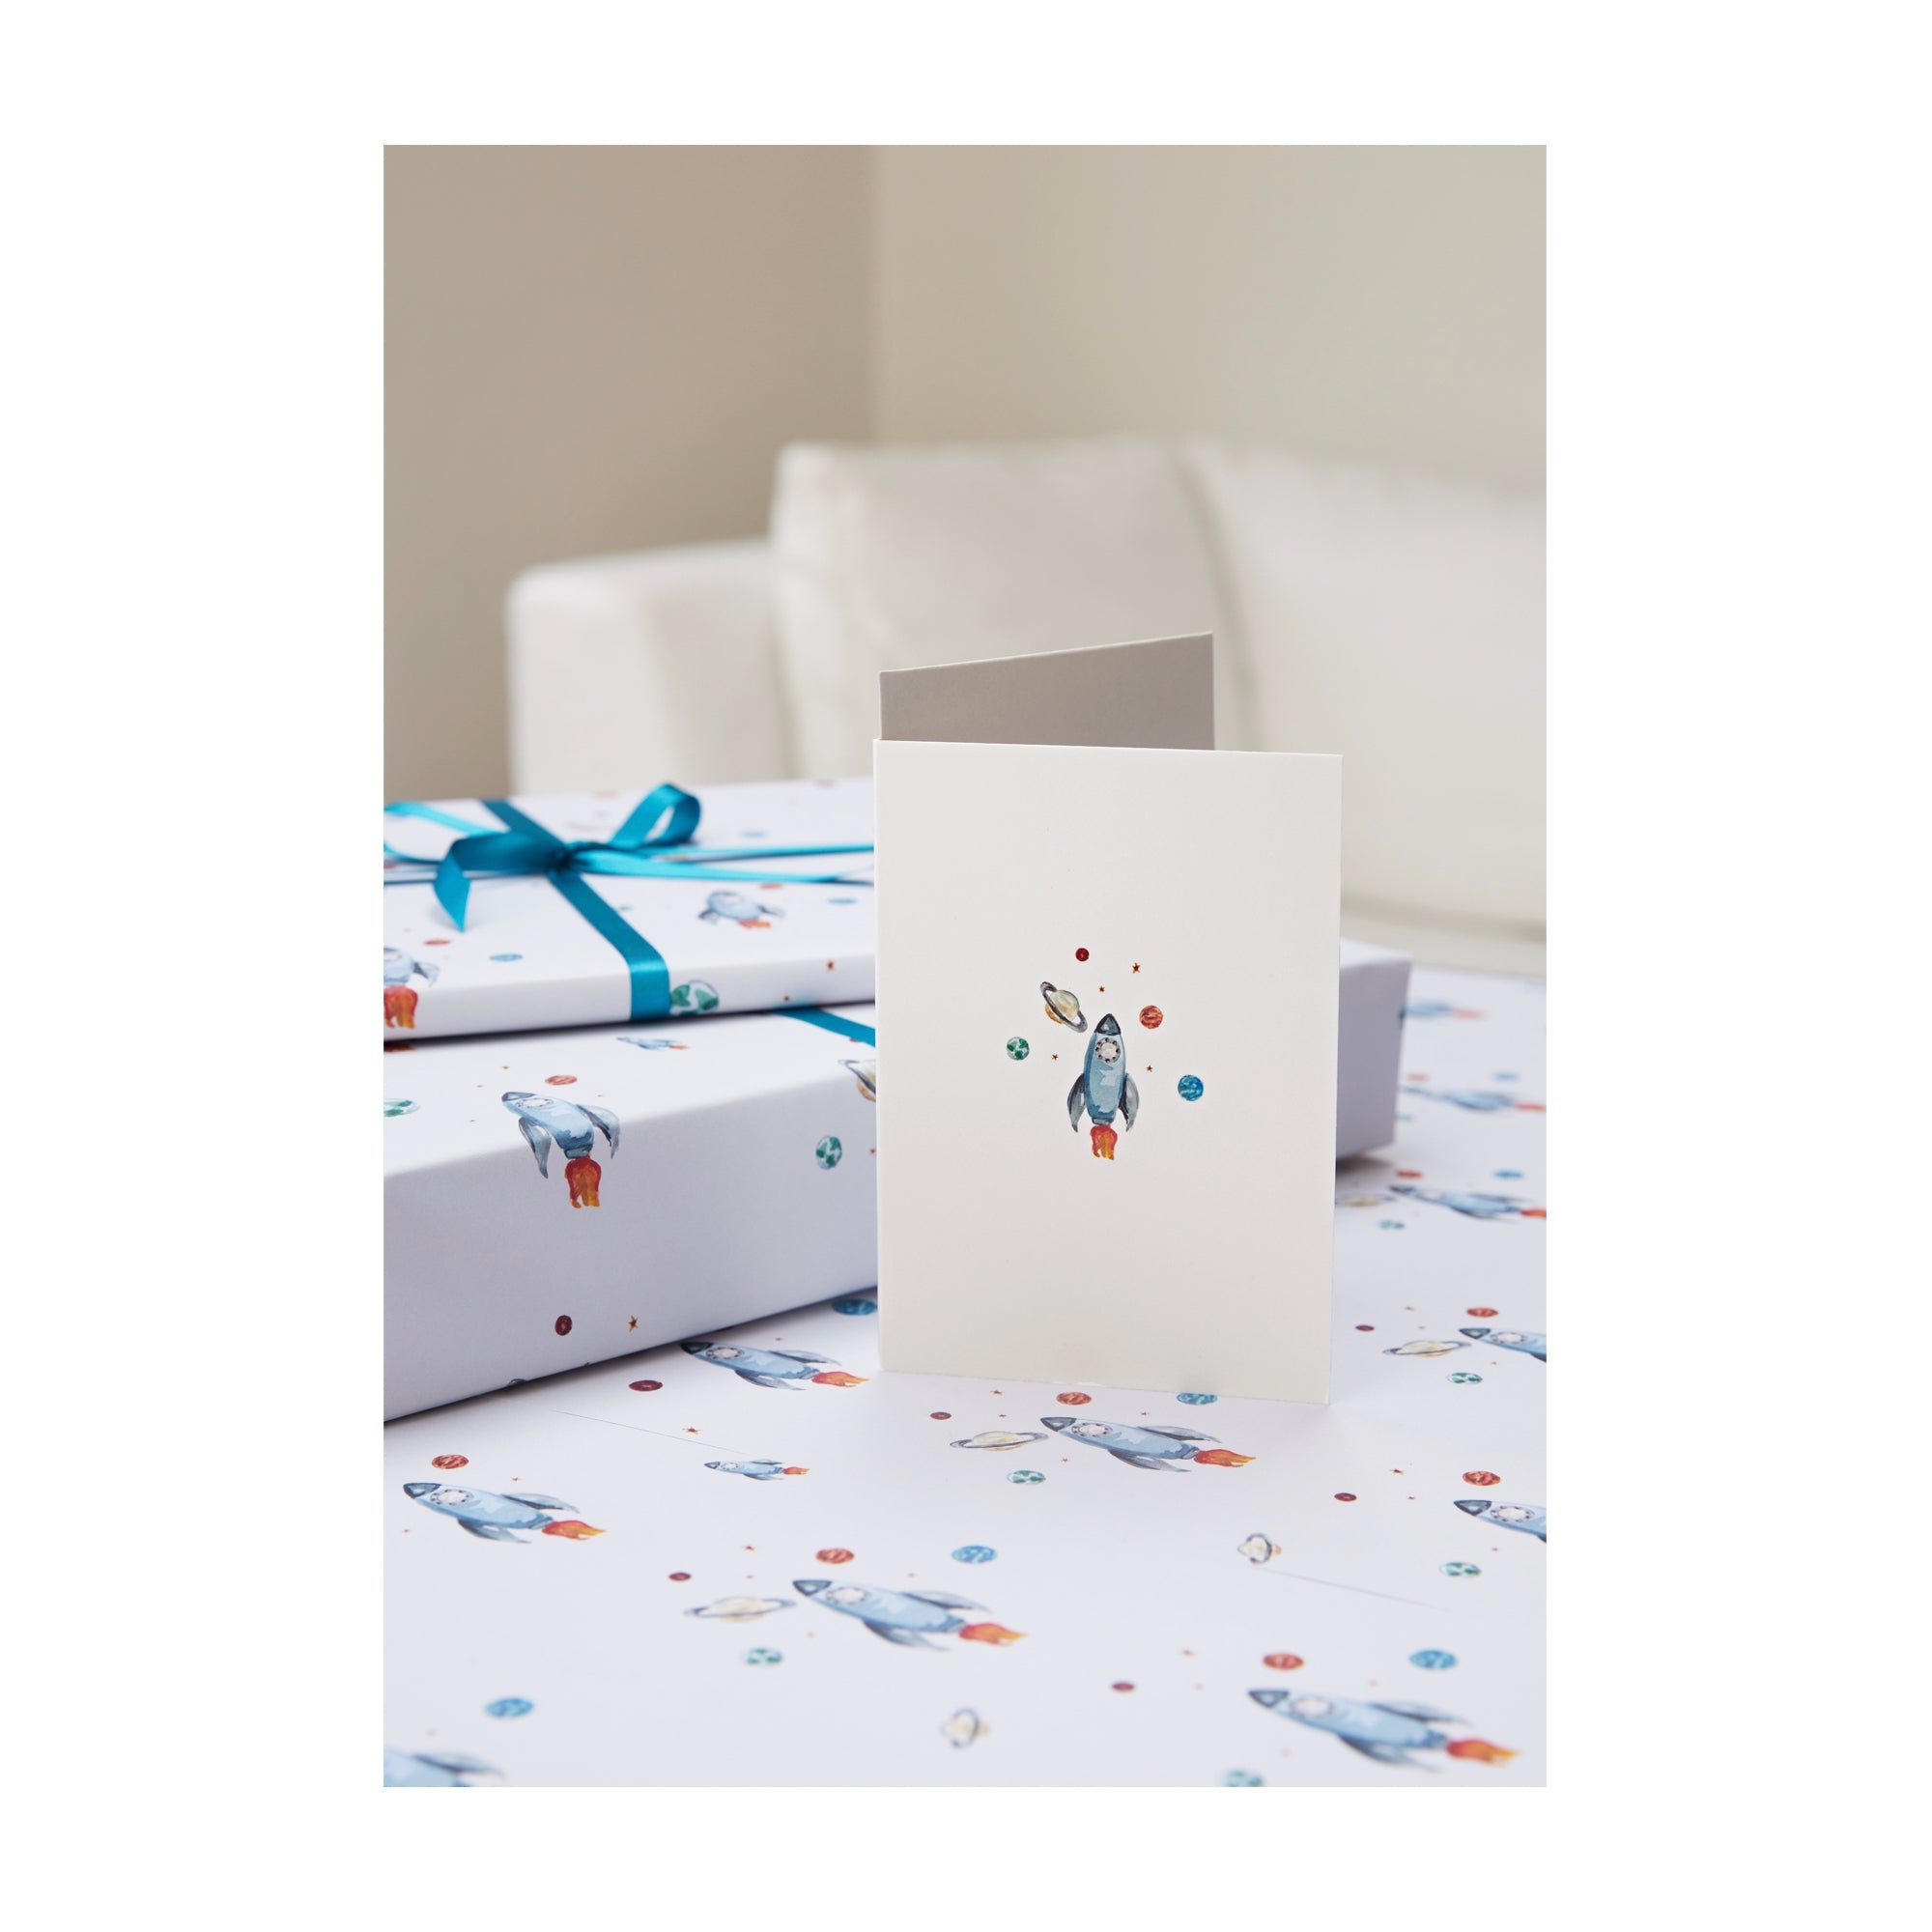 Rocket Ship greetings card and matching wrapping paper by Memo Press